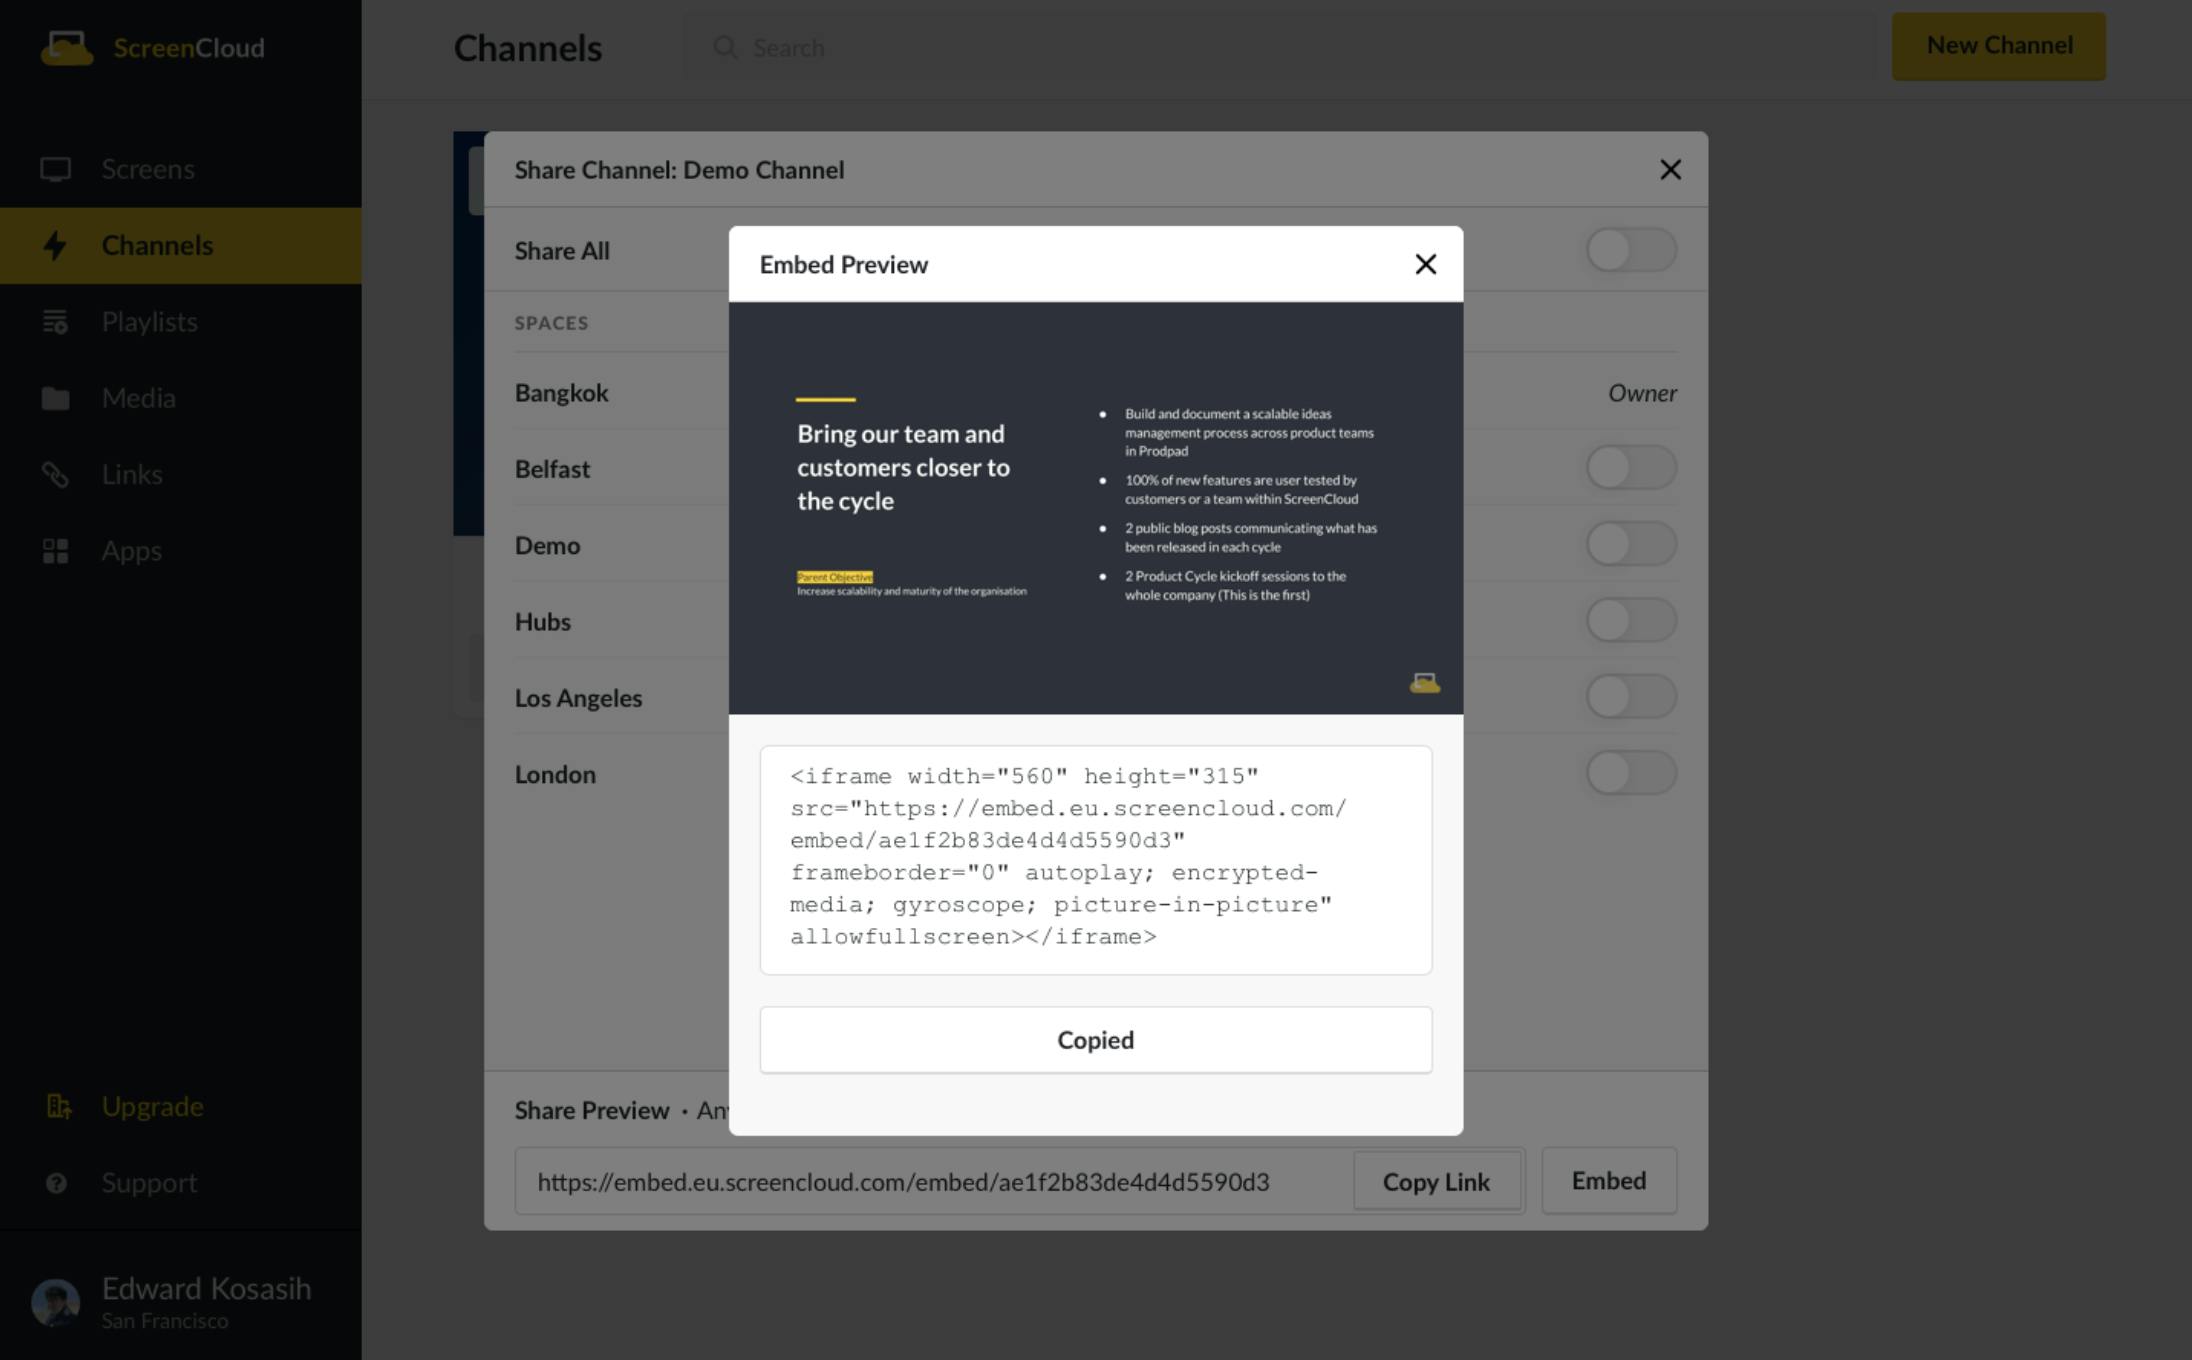 ScreenCloud Walls.io App Guide - Embeddable Channels 1.21.2021.png
